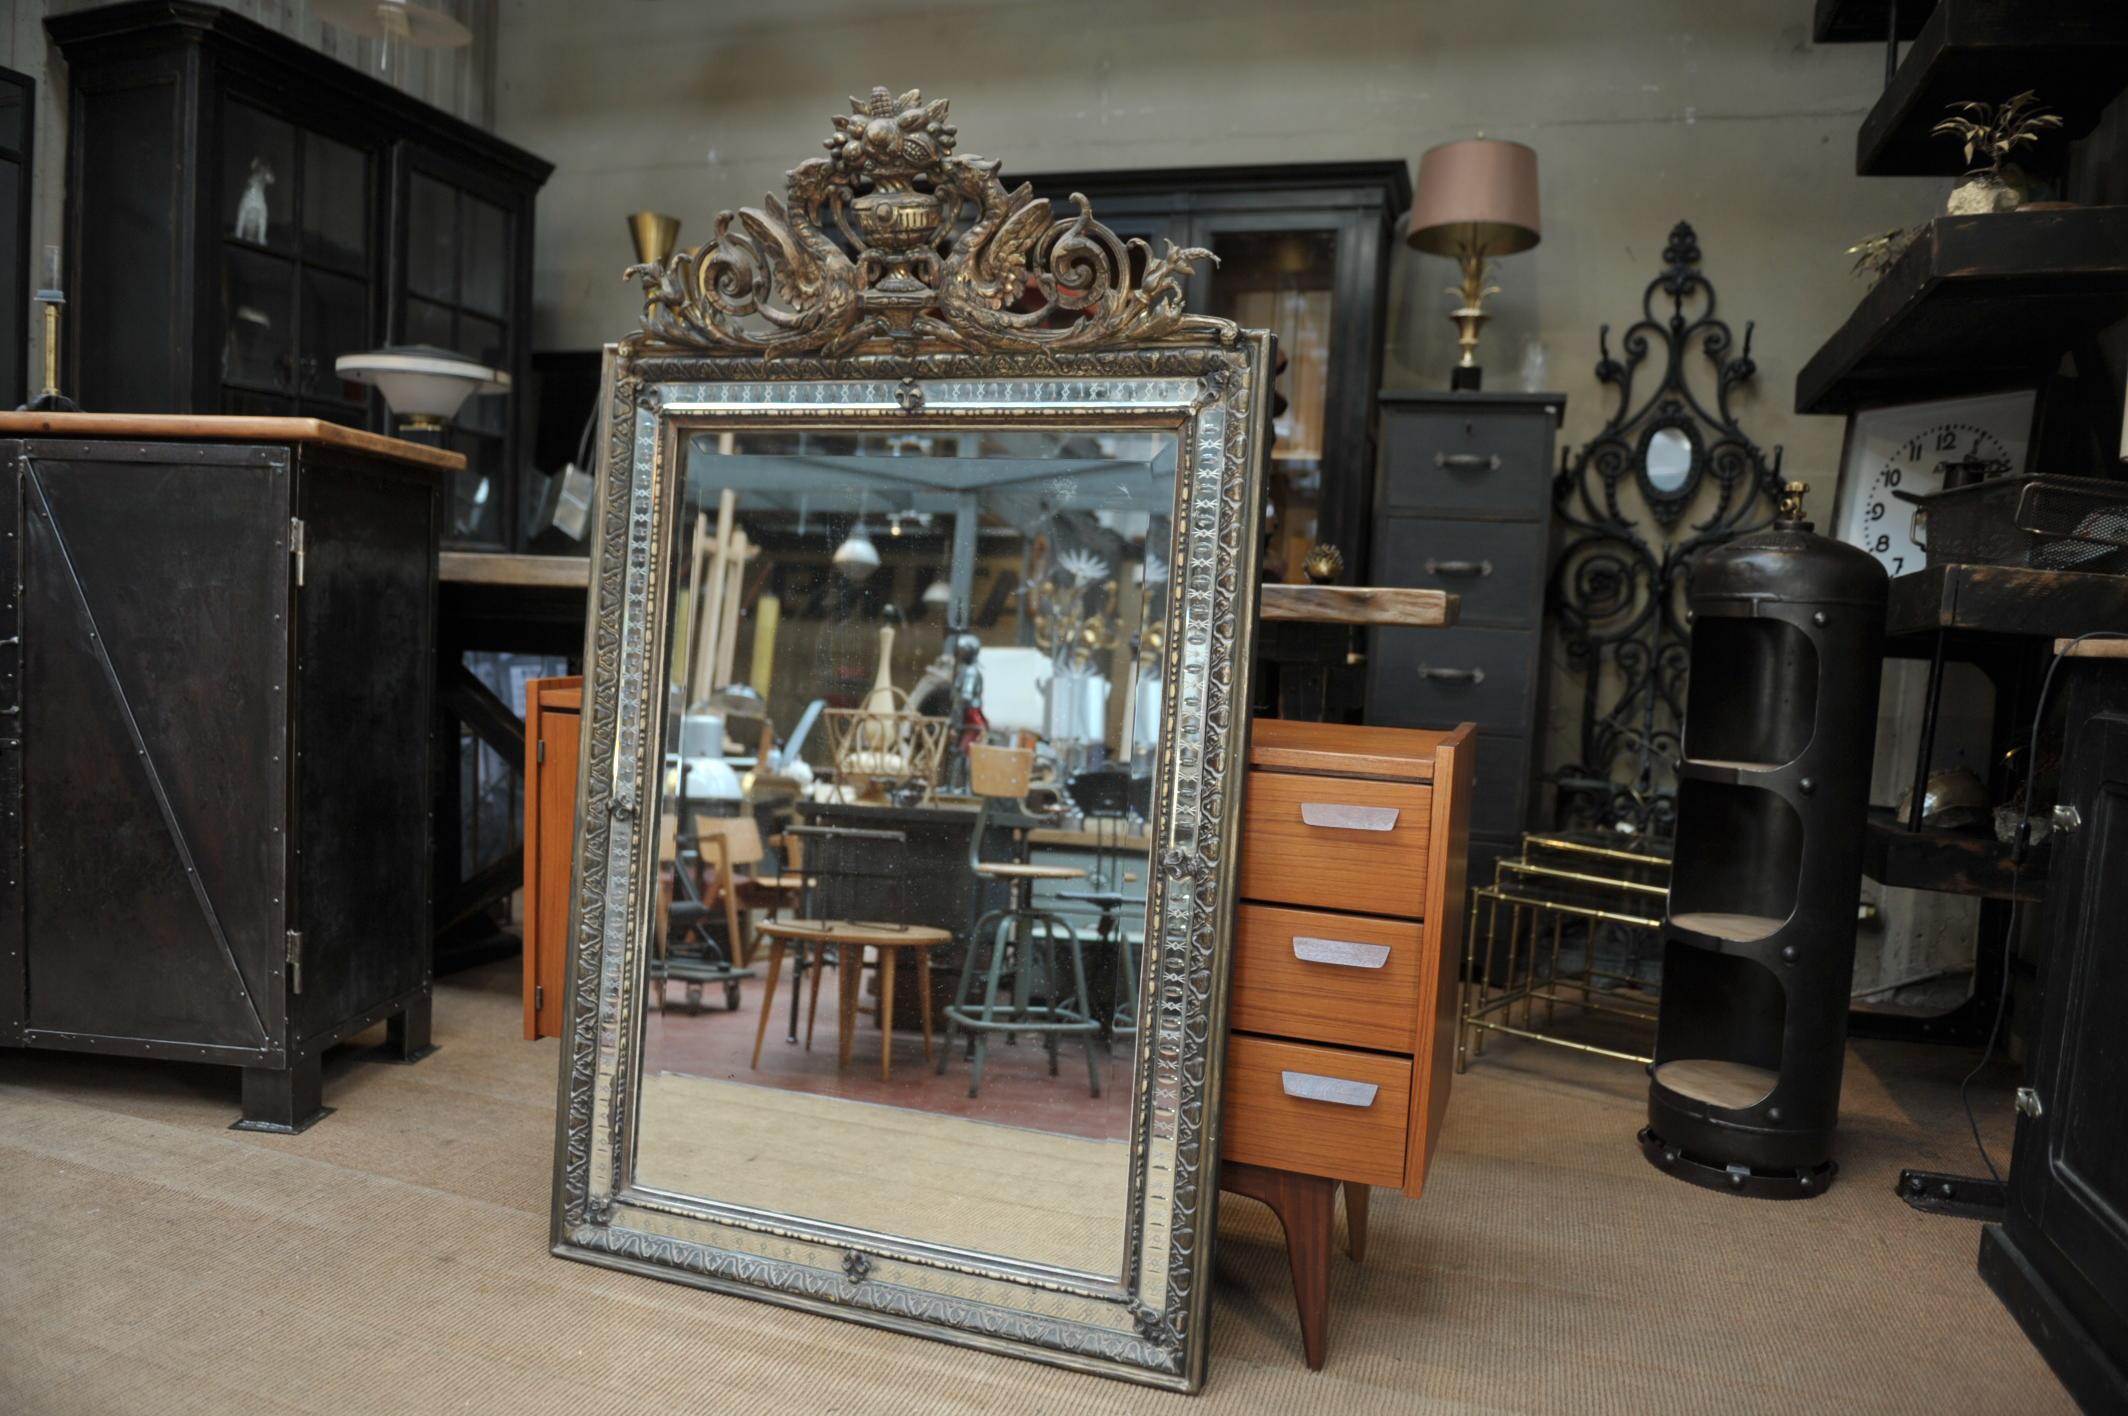 Rare Napoleon III carved glass and pine wood mirror, circa 1850. Very nice carve details and good condition